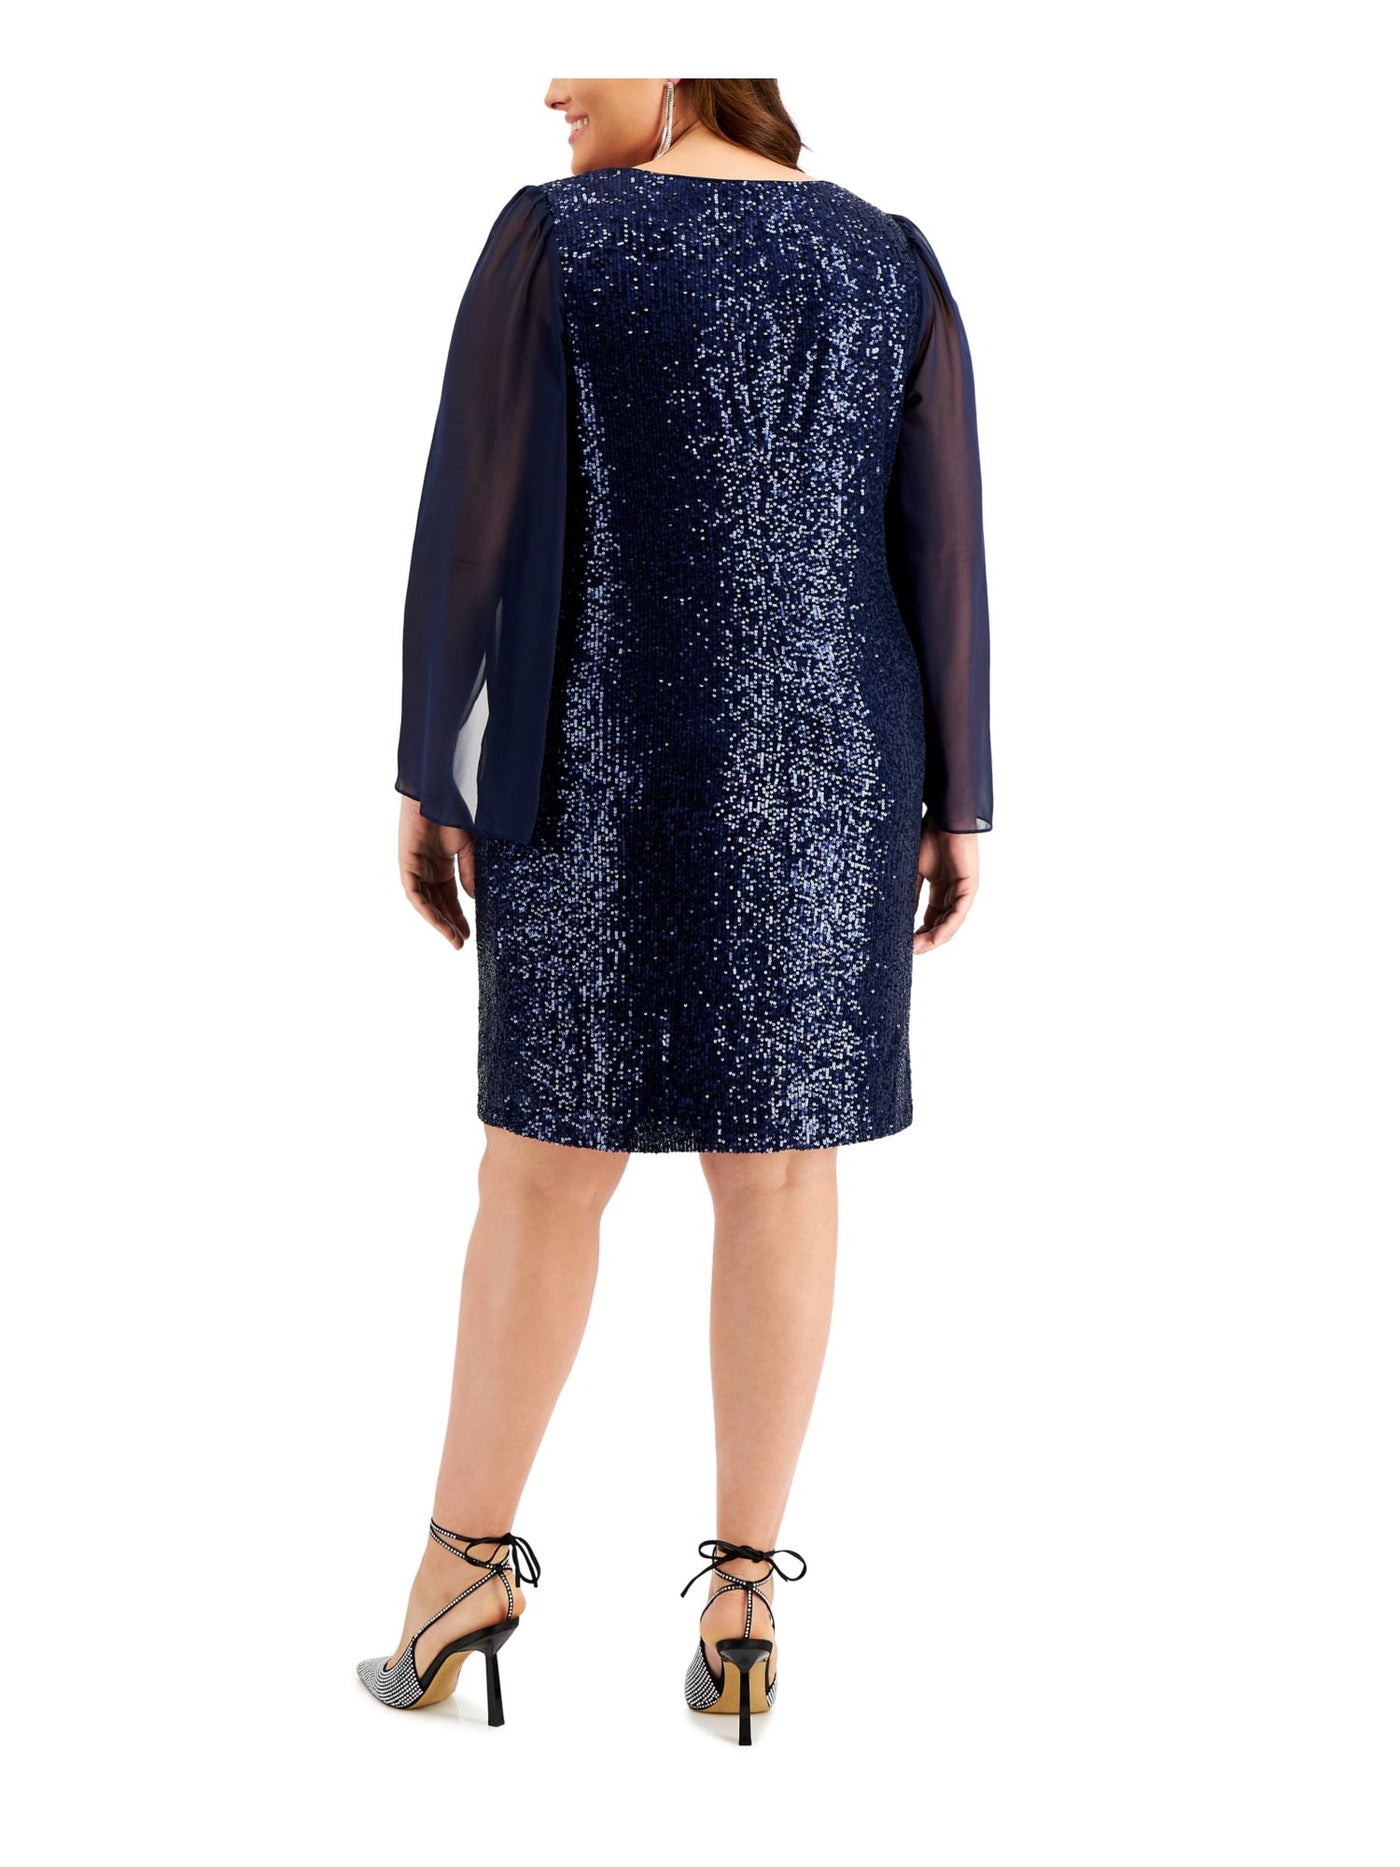 CONNECTED APPAREL Womens Navy Sequined Sheer Pull Over Lined Darted Long Sleeve Round Neck Knee Length Party Sheath Dress Plus 22W